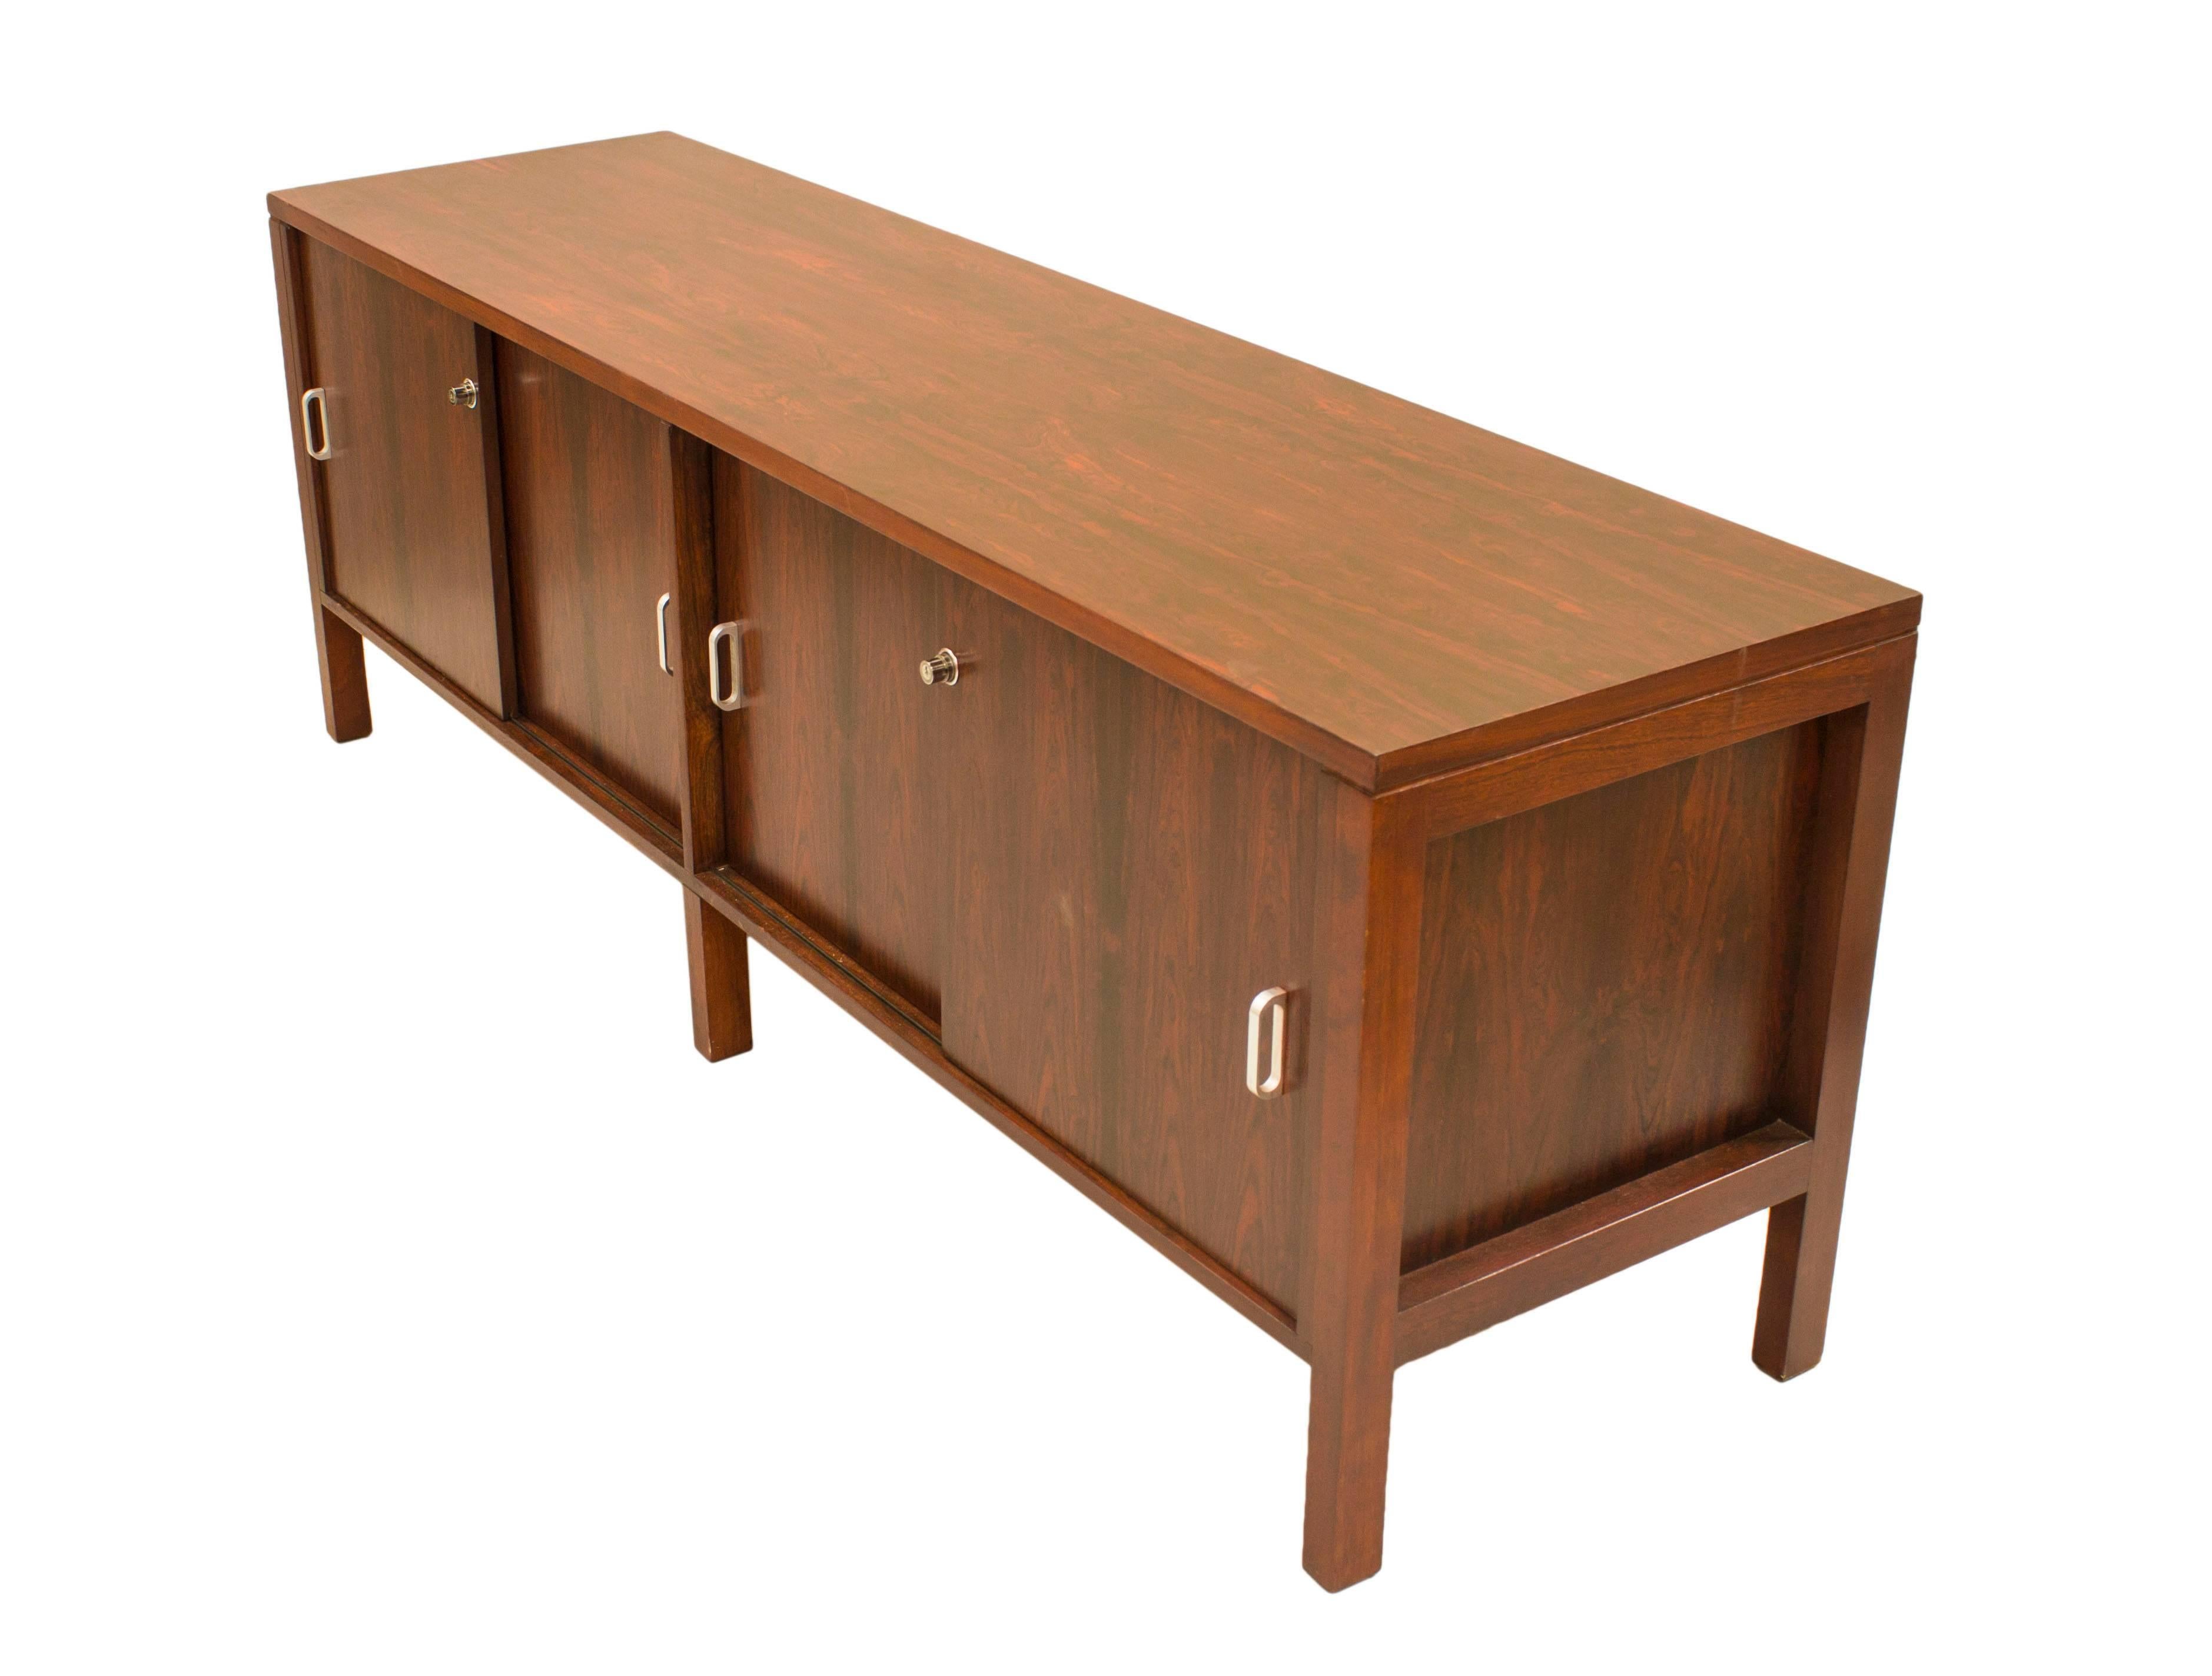 Solid Mahogany Danish Mid-Century Sideboard Media Unit Credenza In Excellent Condition For Sale In Greater Manchester, GB